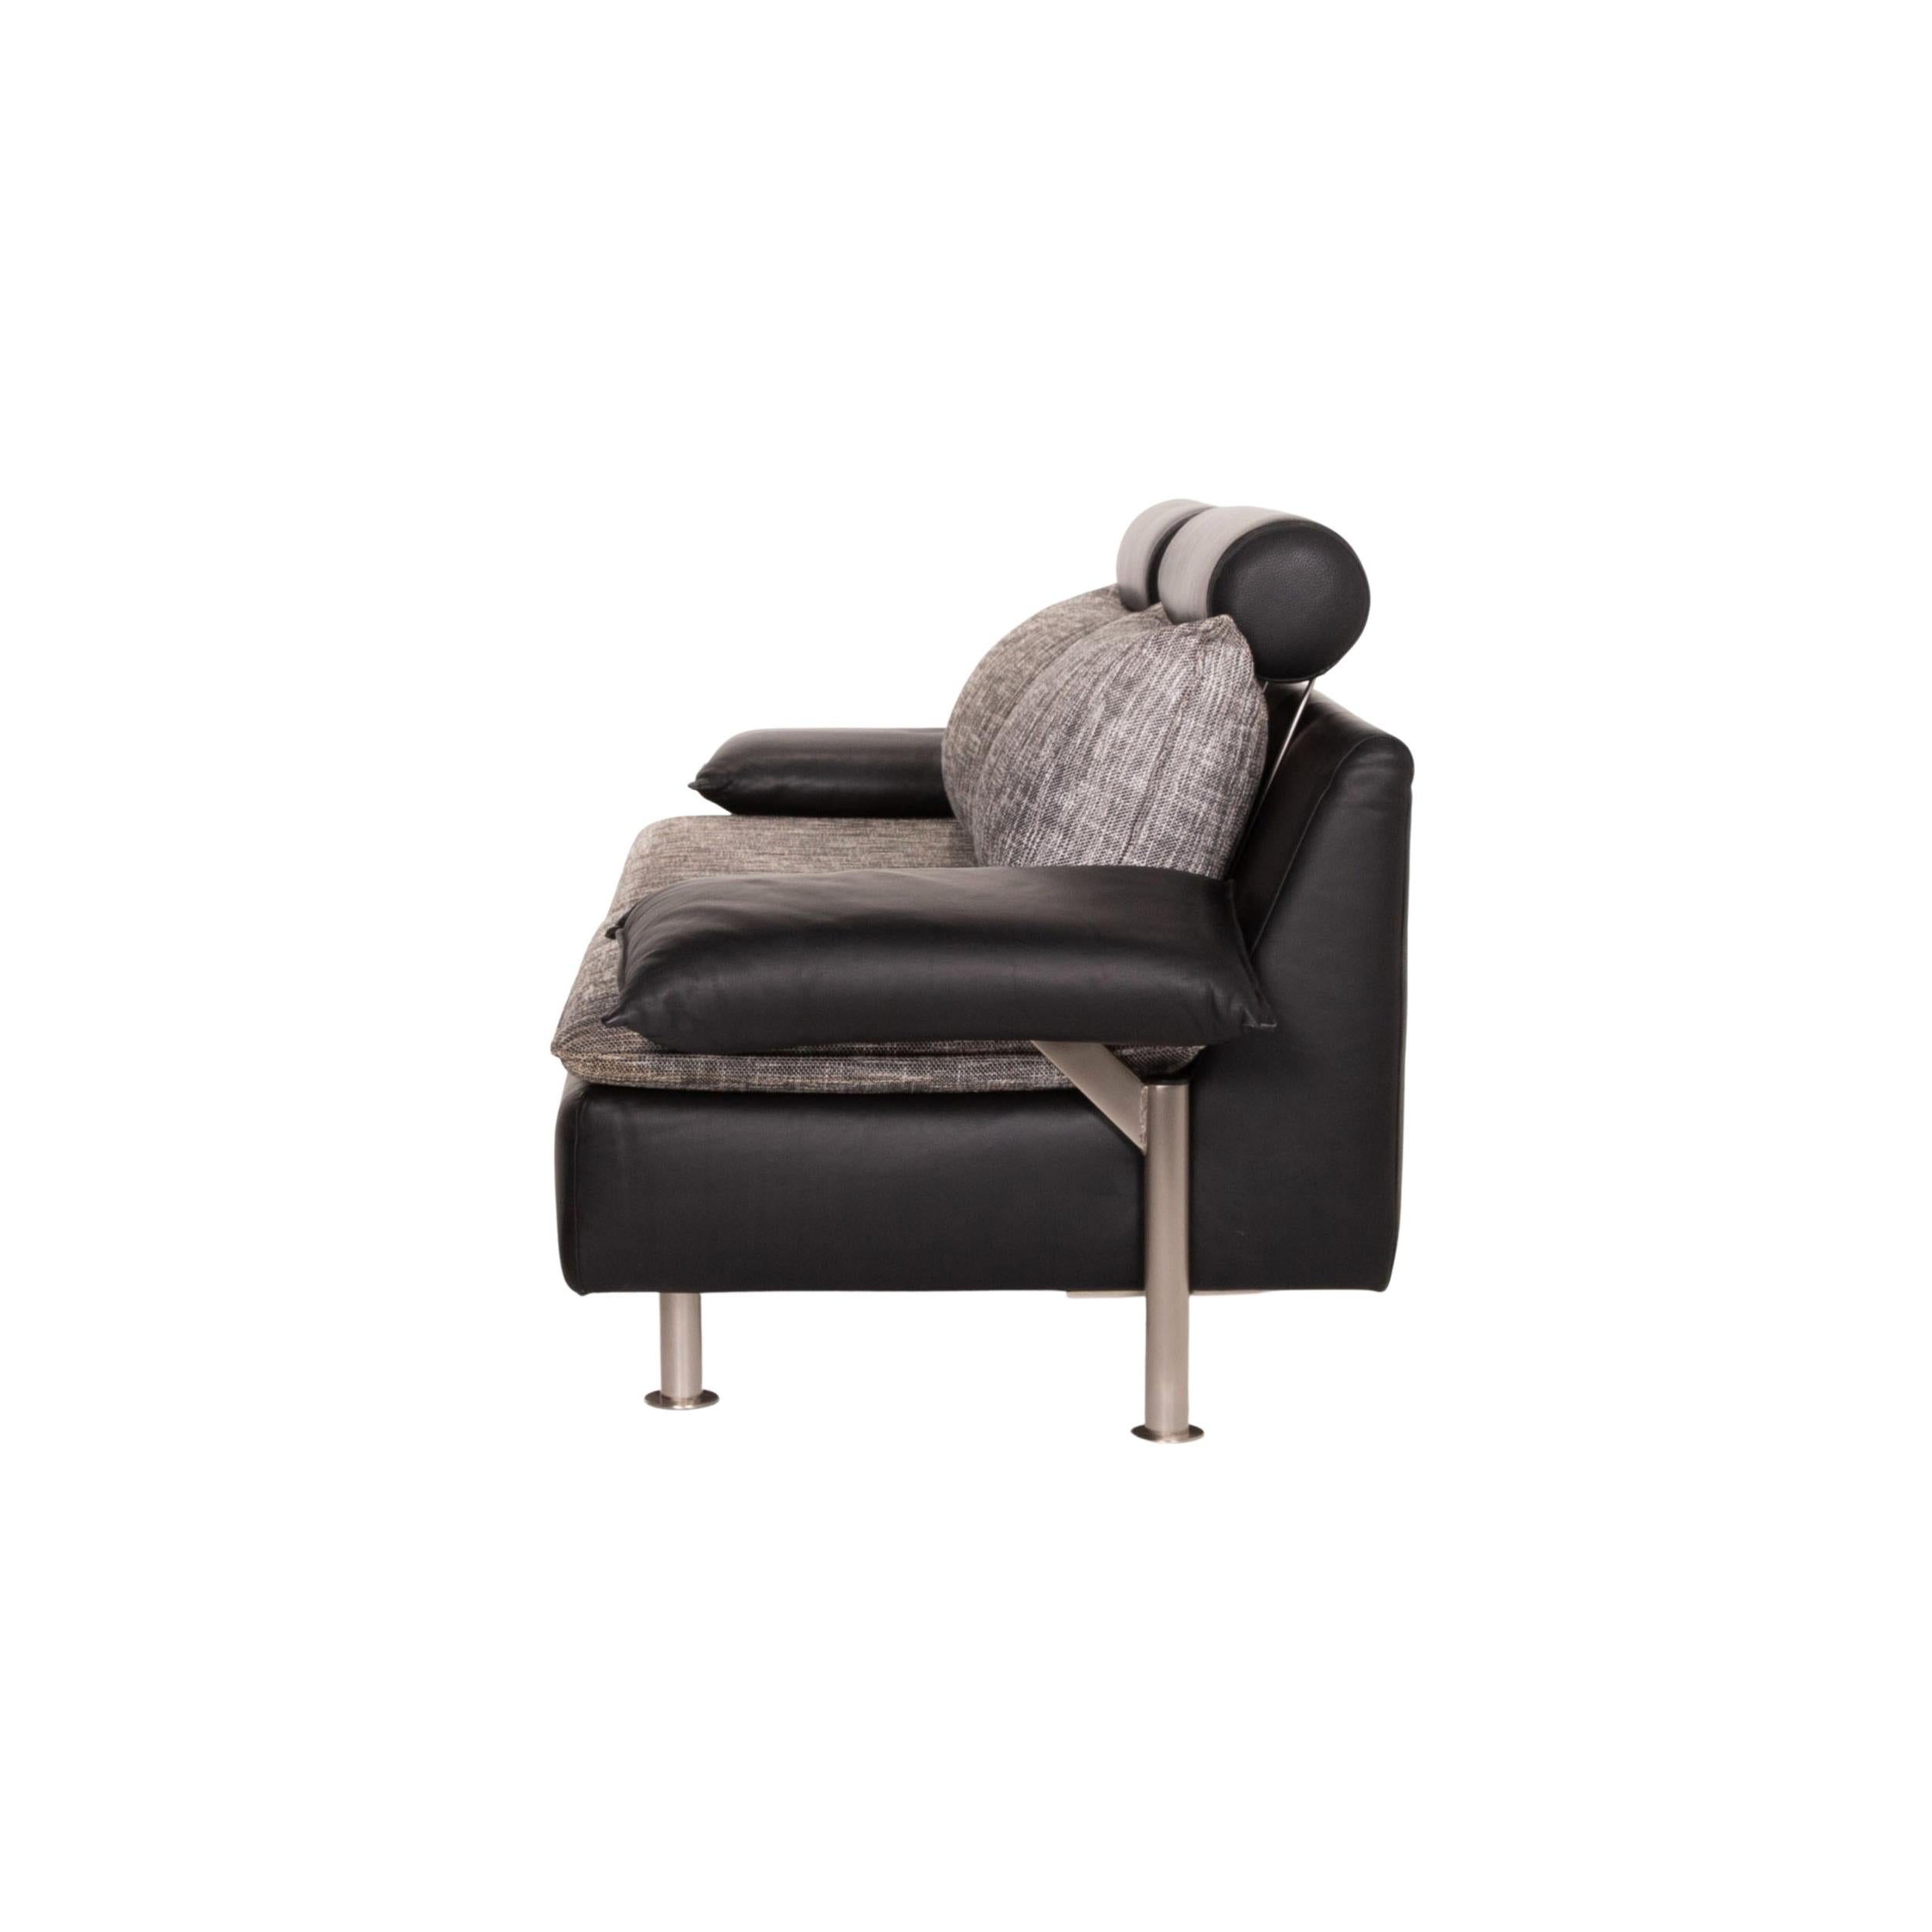 Möller Design Tayo Leather Sofa Black Two-Seat Couch 4